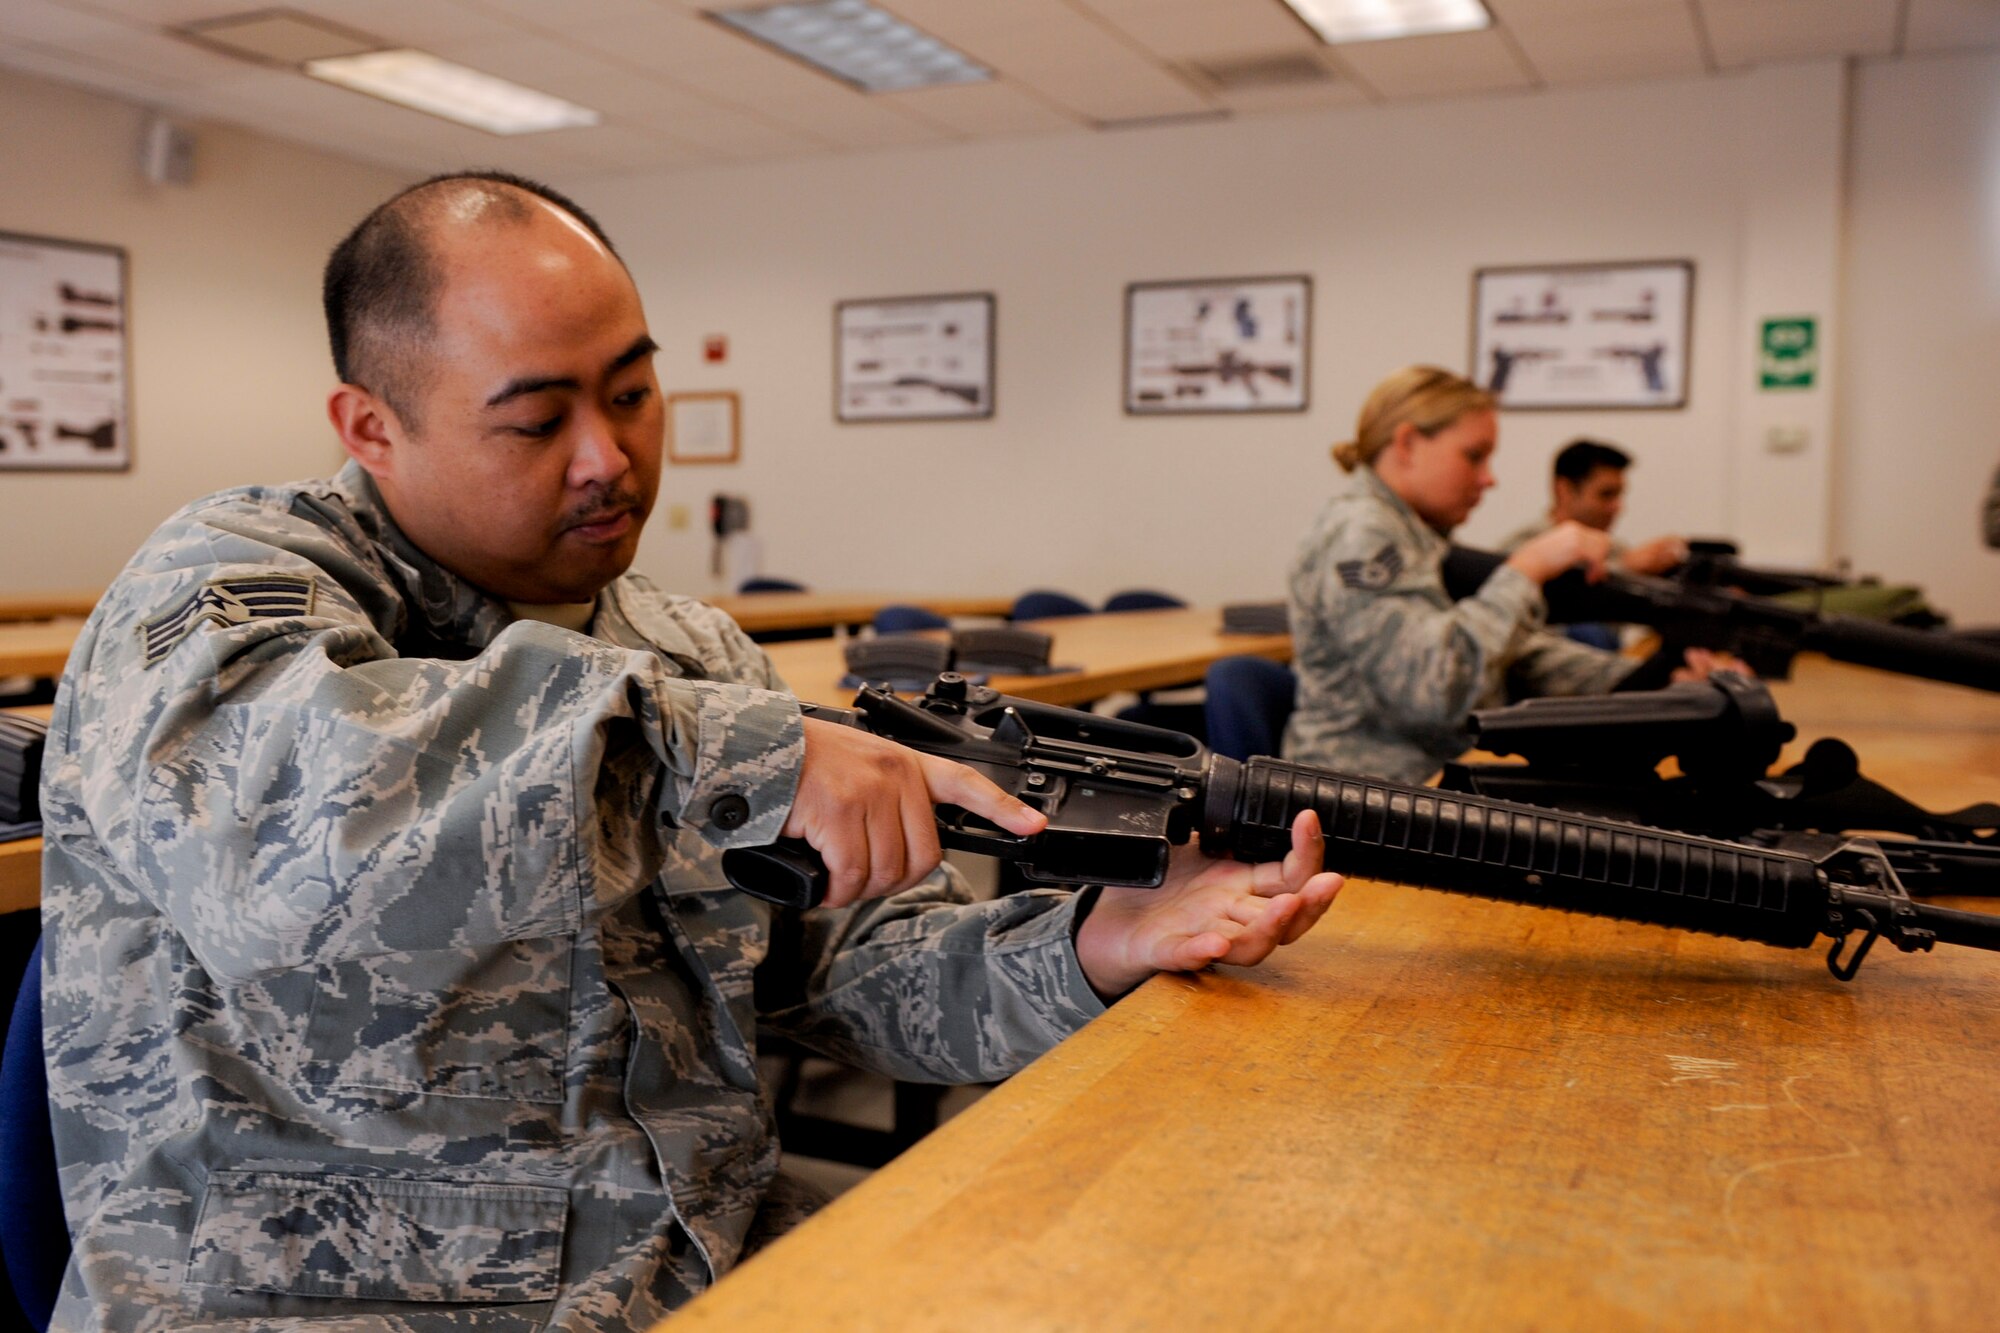 VANDENBERG AIR FORCE BASE, Calif. -- Staff Sgt. Bien Covita, a 30th Comptroller Squadron deputy dispersing officer, clears an M16 assault rifle during the first class of the new Rifle Carbine Air Force Qualification course here Tuesday, Dec. 6, 2011. The new course, in which Airman fire nearly double the amount of rounds of the previous course, contains both basic firing positions (prone, sitting, kneeling, standing) and advanced tactical movements. (U.S. Air Force/Staff Sgt. Levi Riendeau)